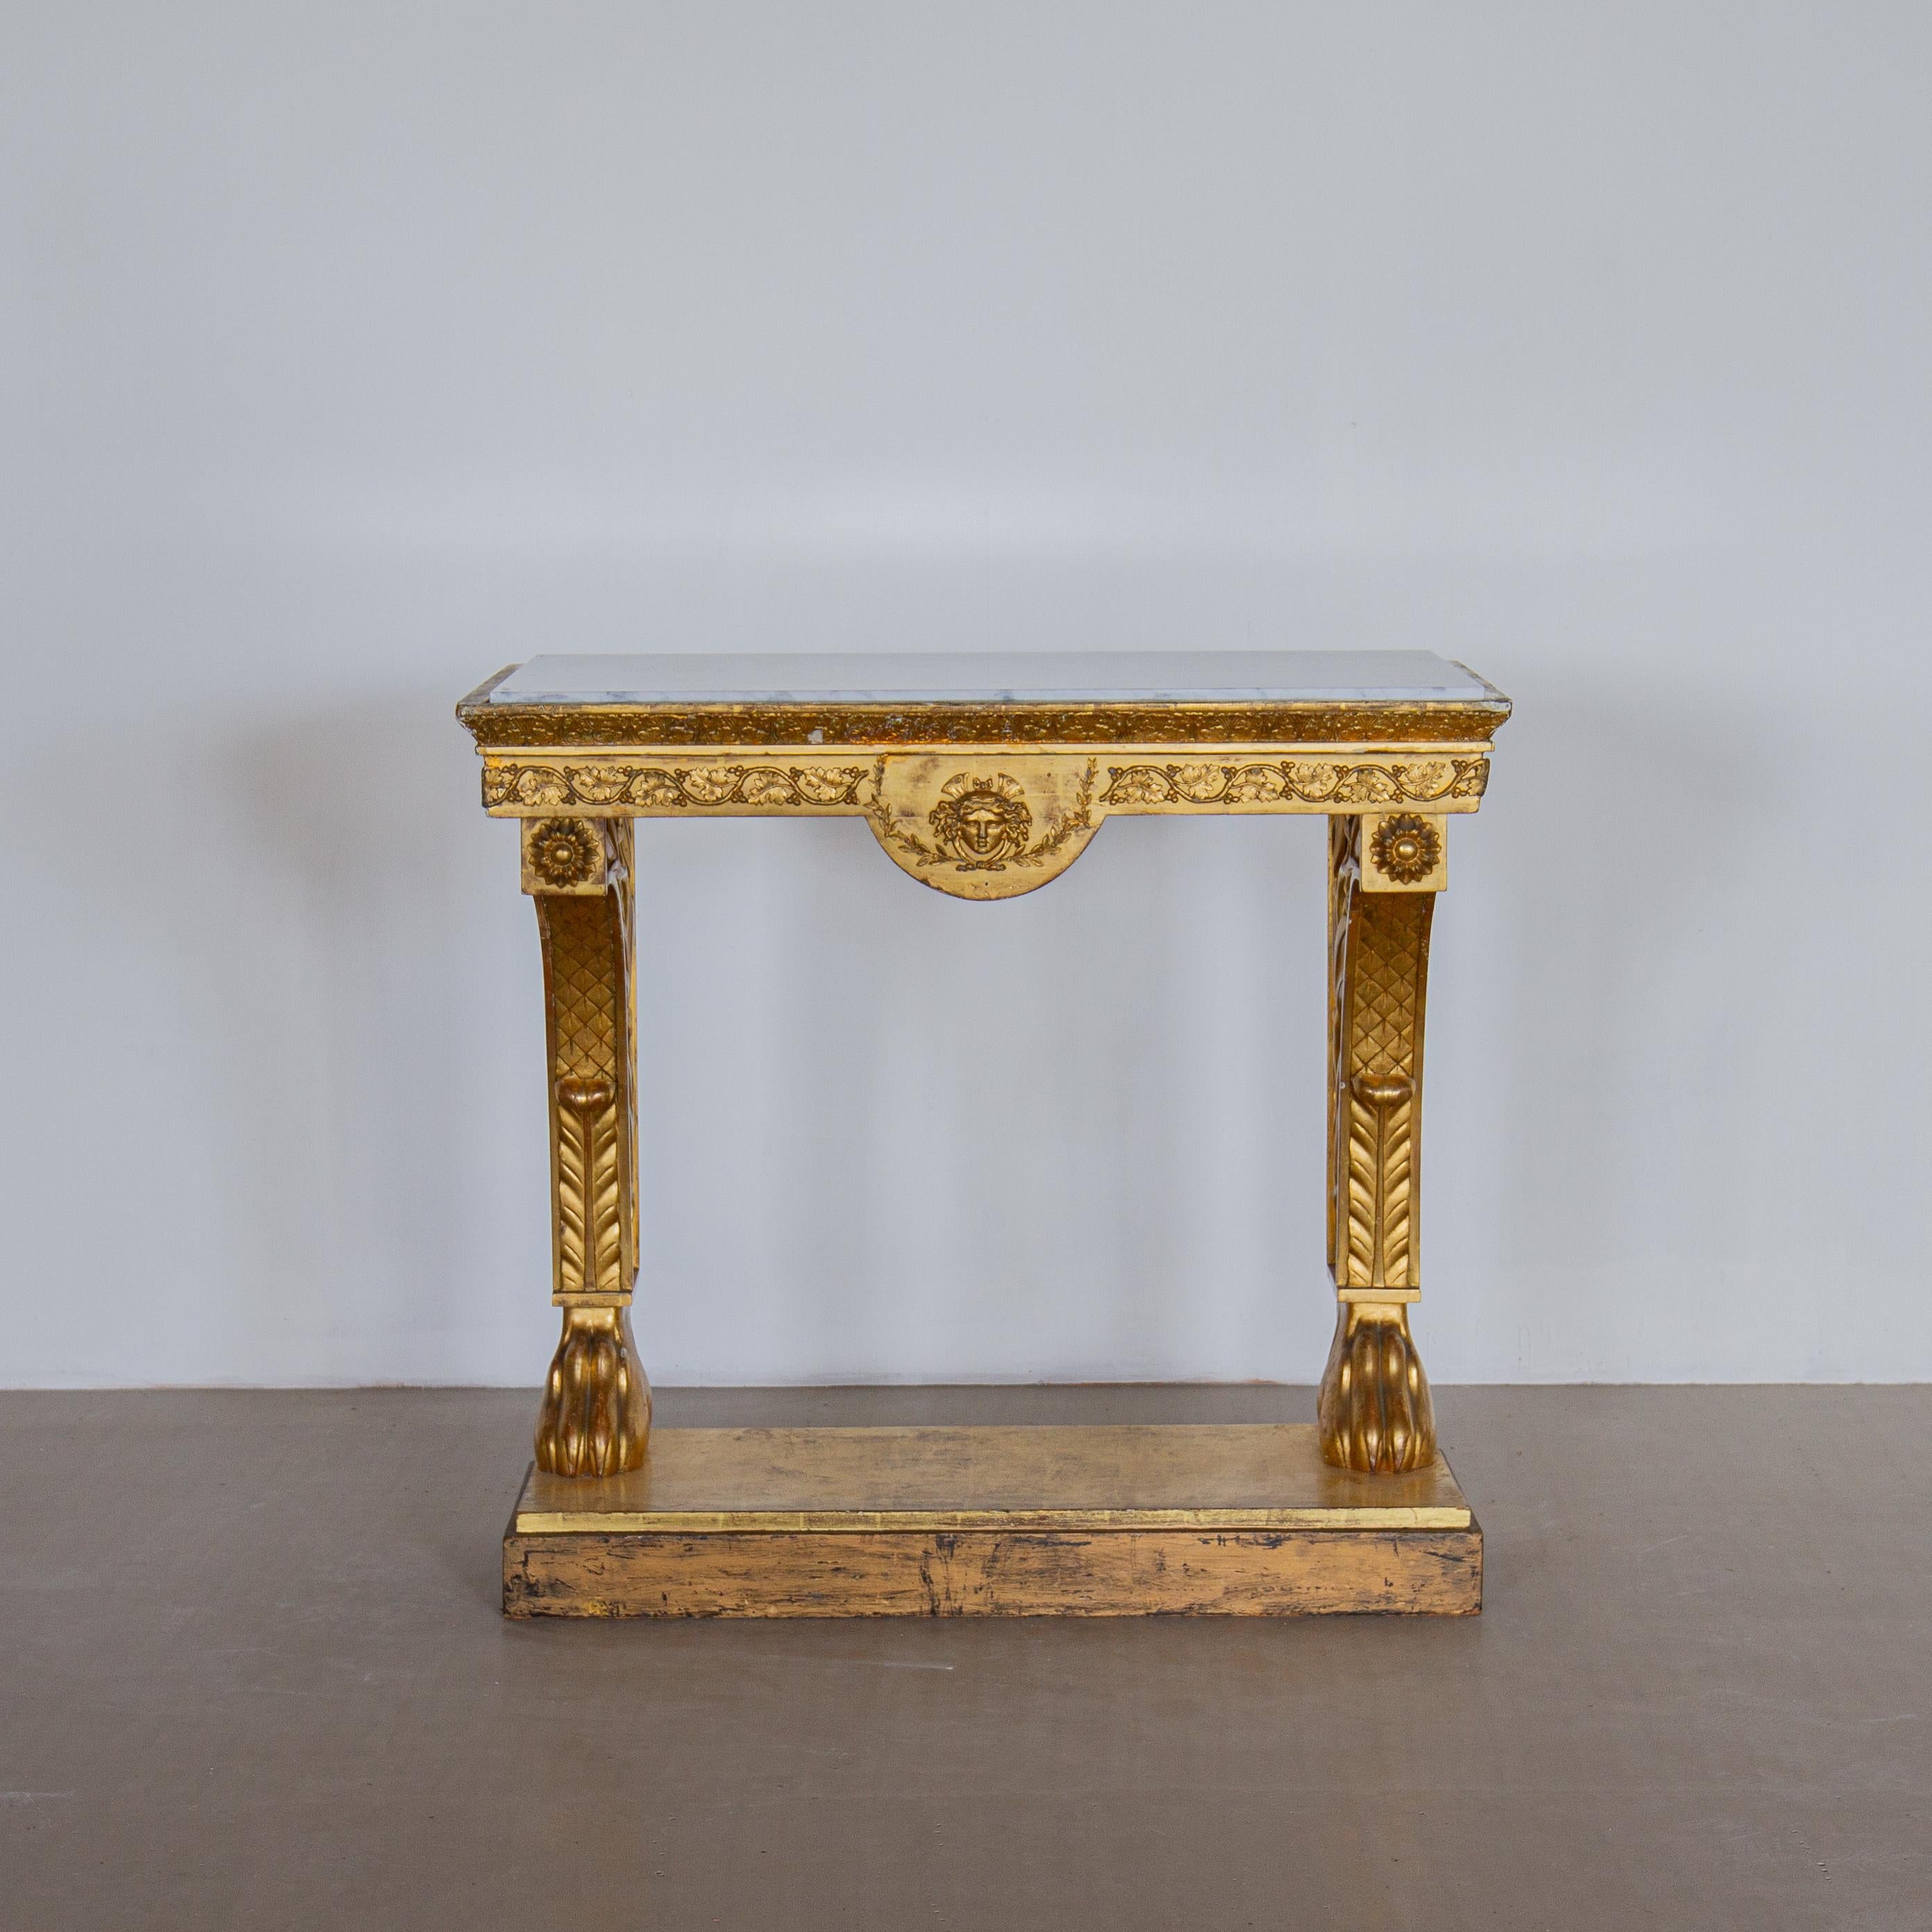 An early 19th century giltwood console table with foliage and berries frieze and a central carving of medusa, on two legs set on paw feet and base and with inset veined white marble top. 

Light damage and old repairs.